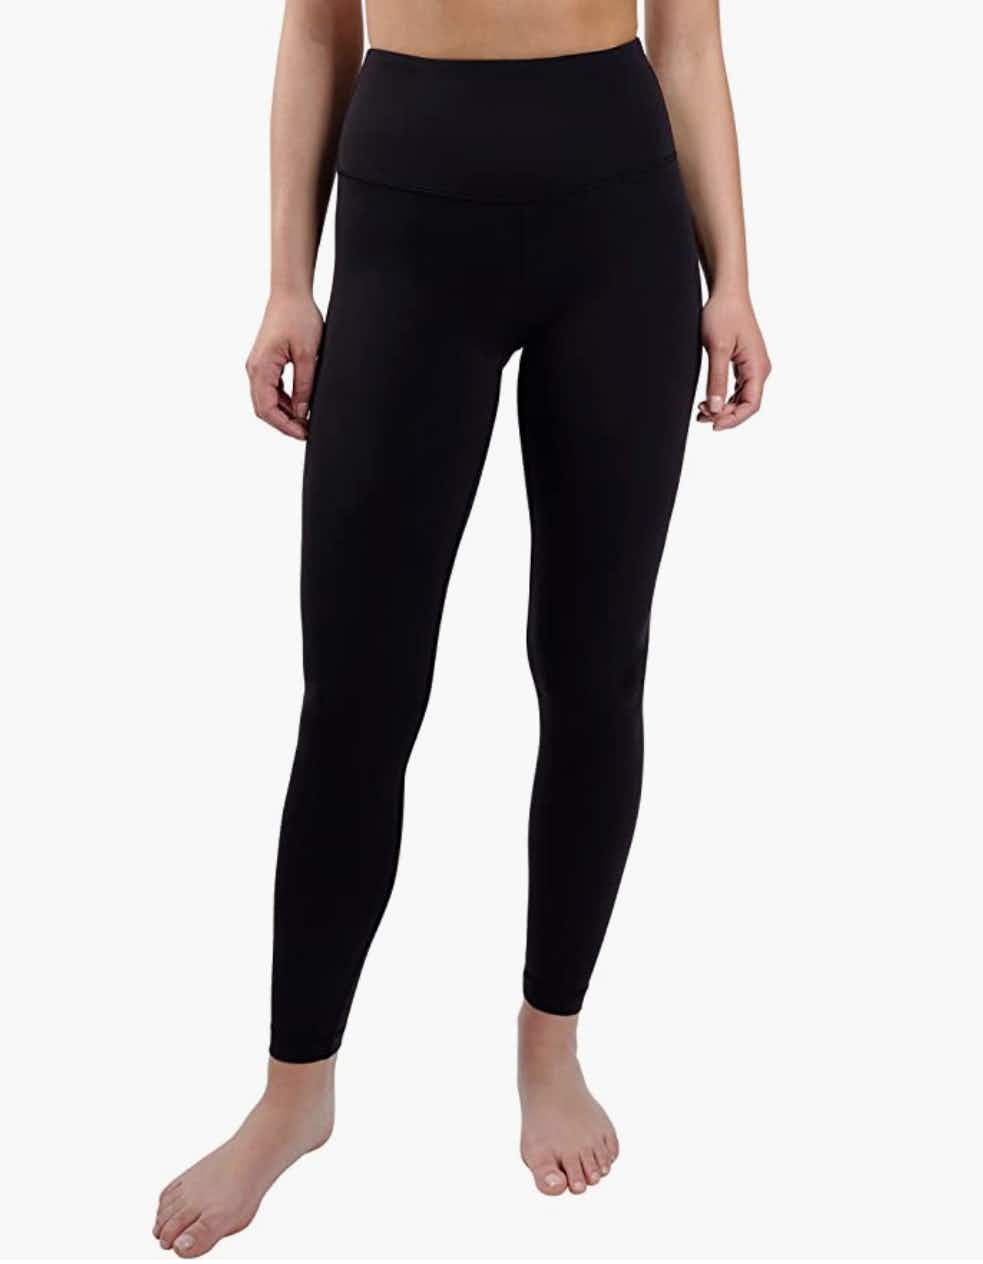 Kirkland Signature ladies brushed leggings with pockets are $3 off